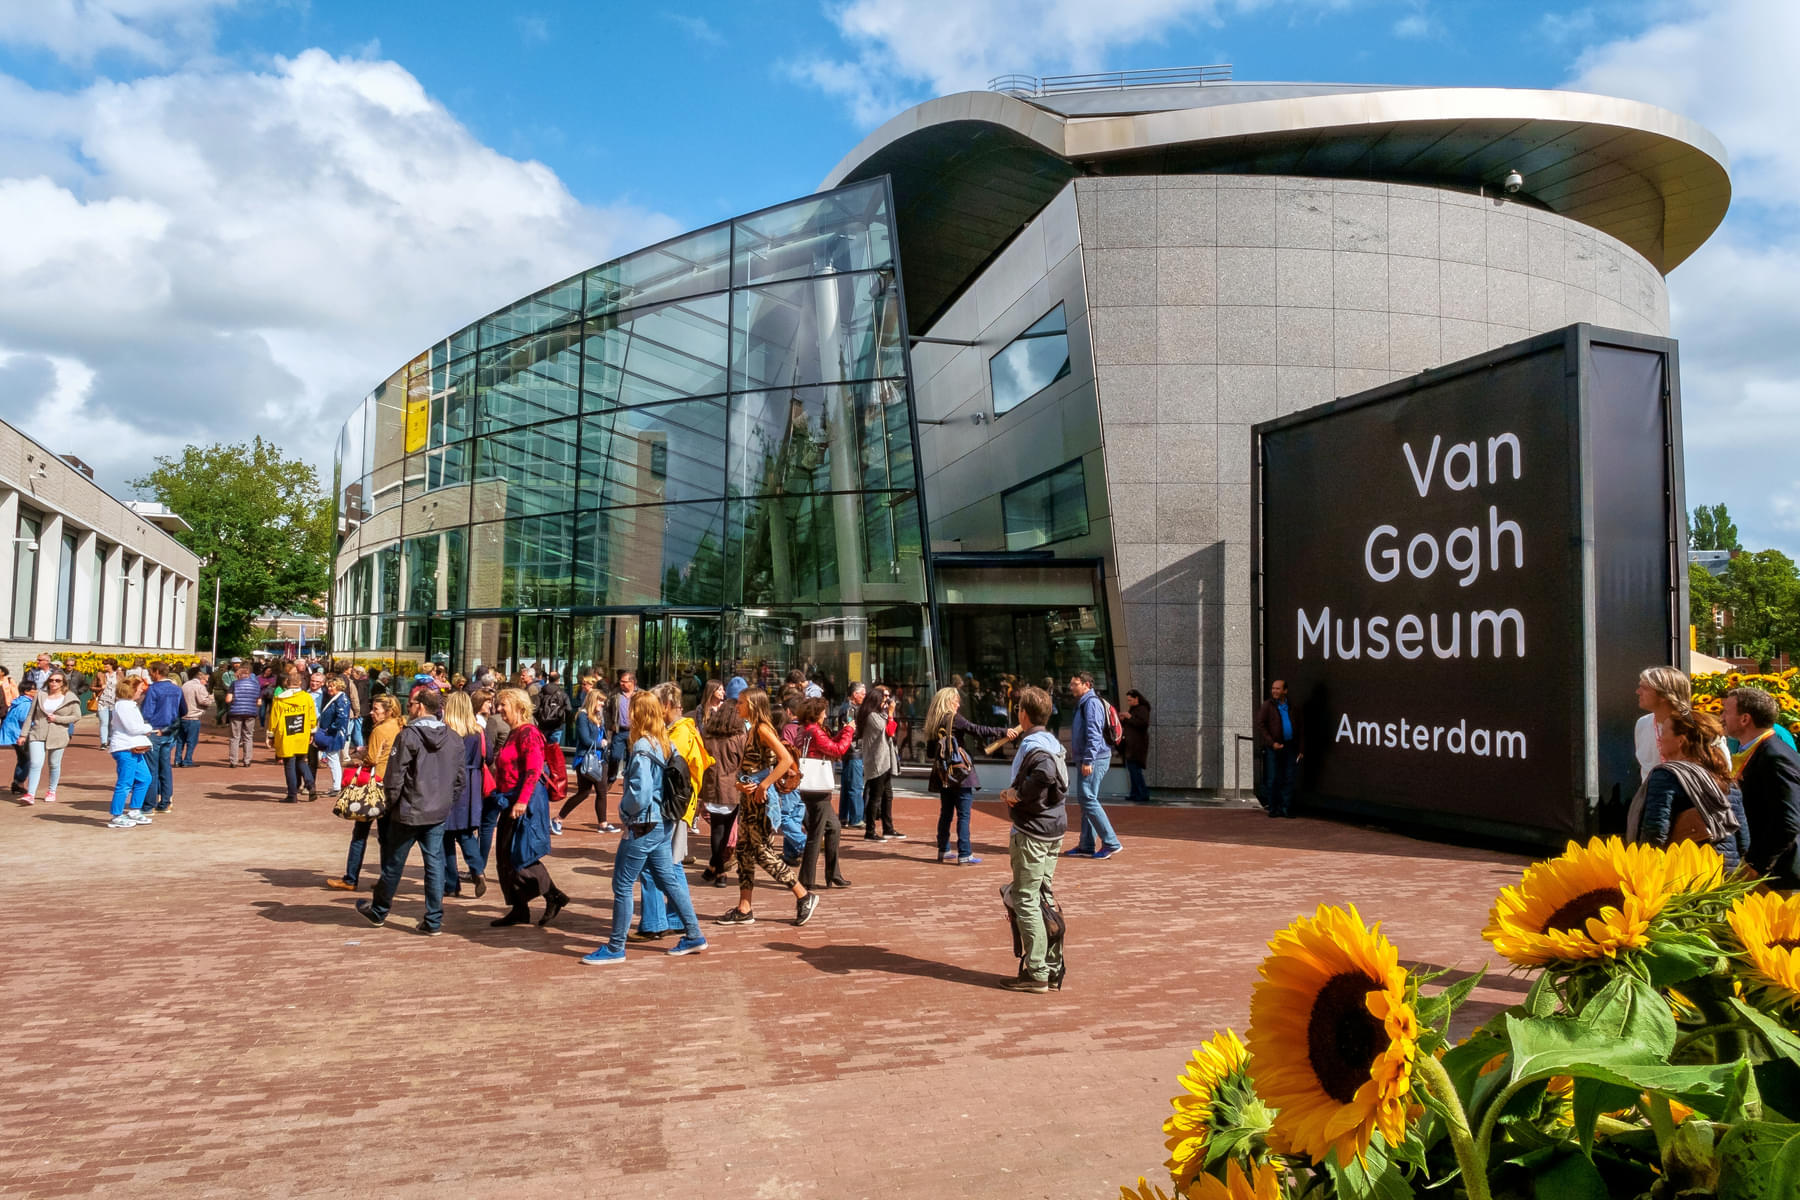 This popular attraction of Amsterdam houses the largest collection of artworks by Vincent van Gogh in the world.